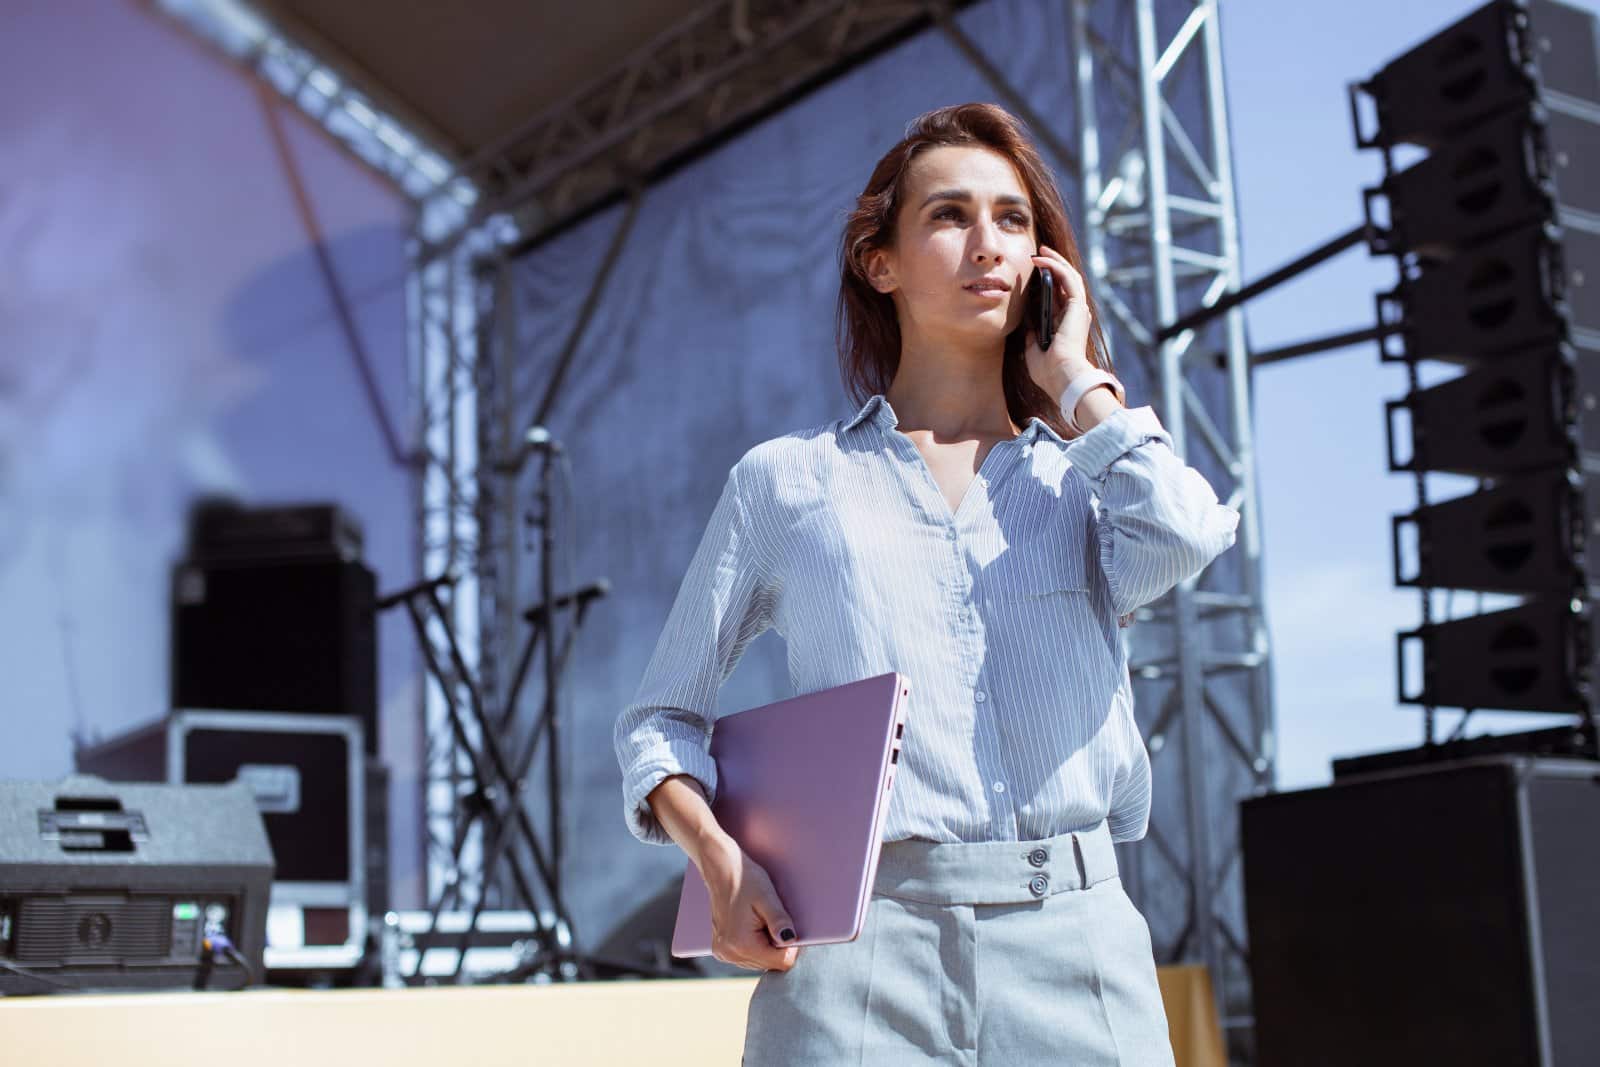 <p class="wp-caption-text">Image Credit: Shutterstock / lucky boy studio</p>  <p>Join teams that set up, operate, and take down festivals around the world. From music to cultural festivals, work behind the scenes. It requires flexibility, physical stamina, and a love for the festival atmosphere.</p>